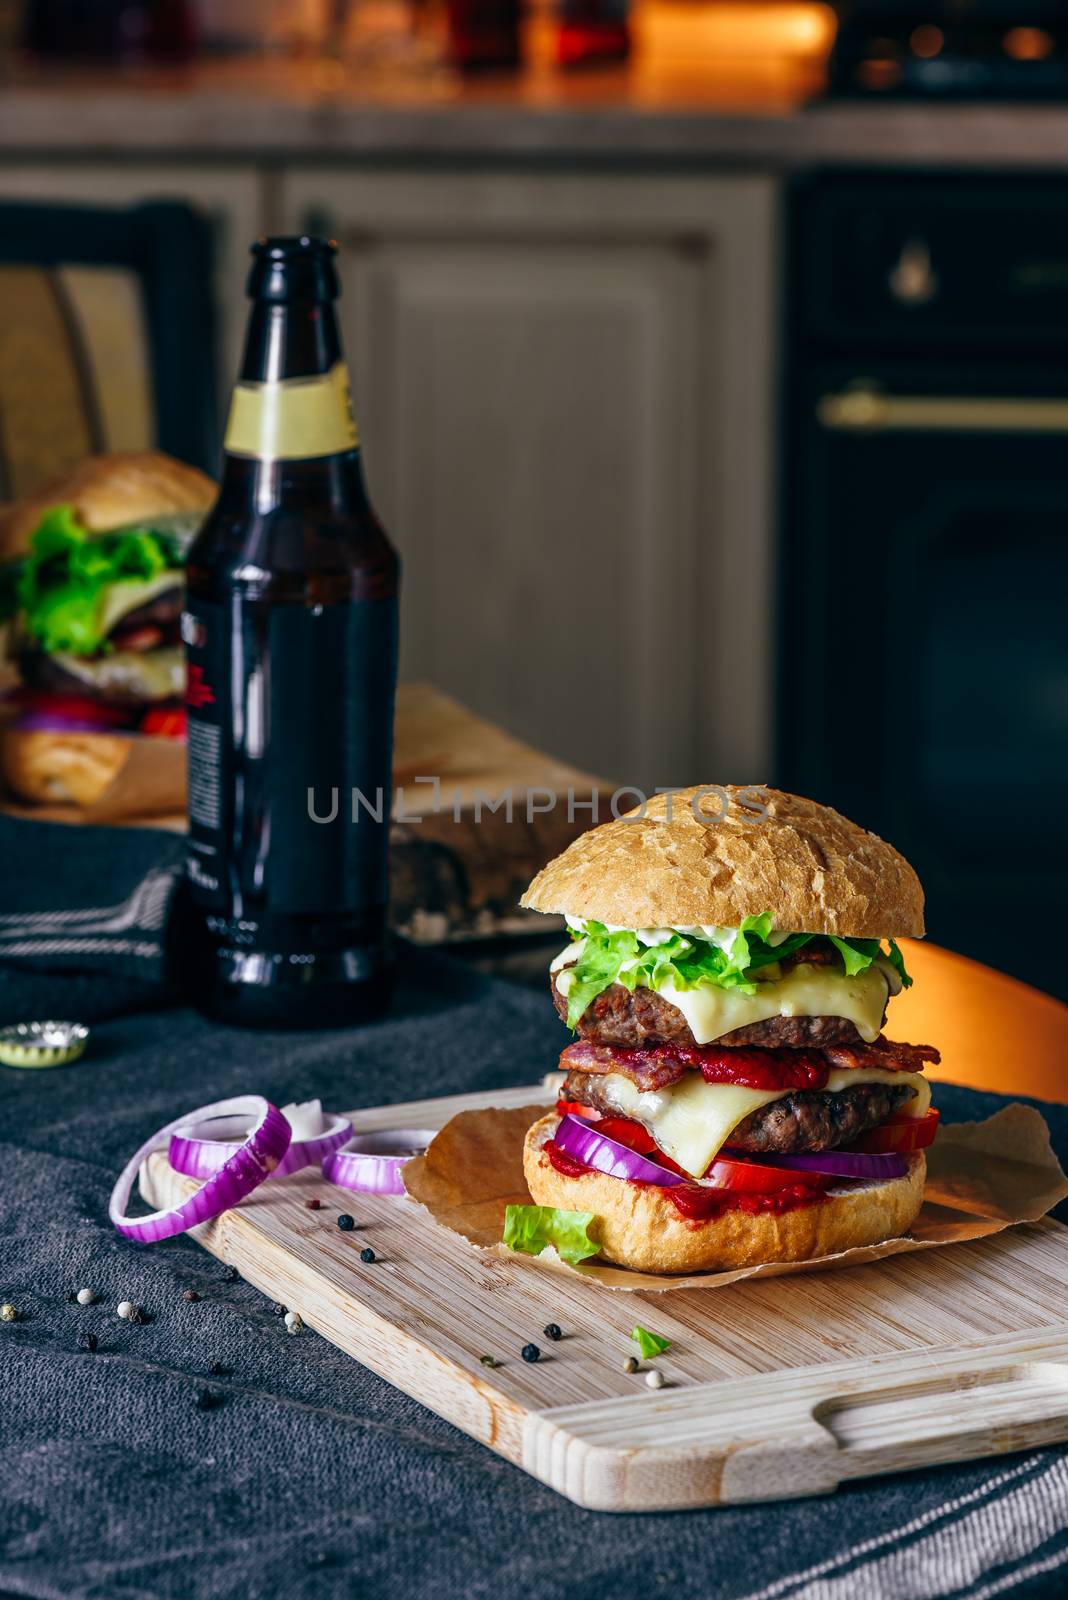 Prepared Cheeseburger with Two Beef Patties on Cutting Board. Bottle of Beer and Some Ingredients on Table.